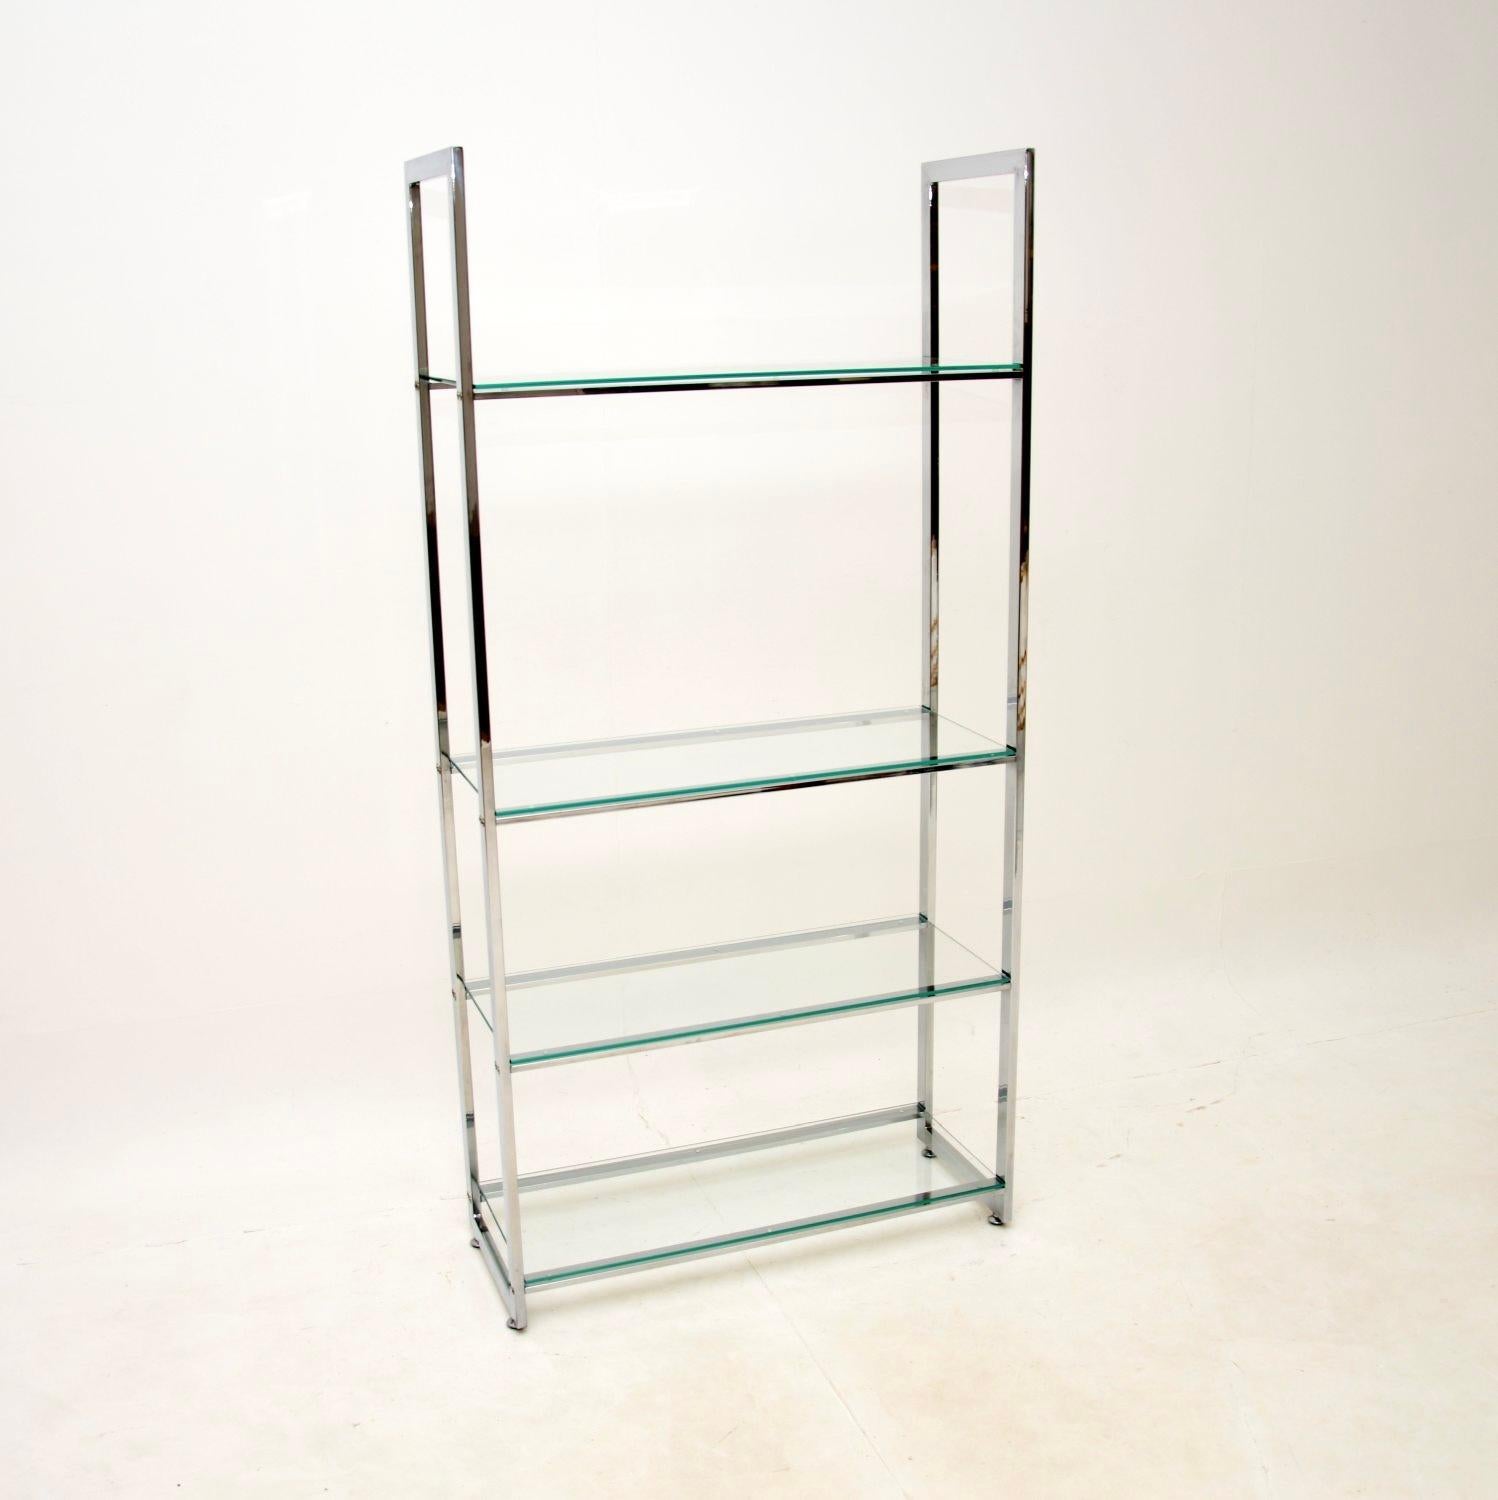 A very stylish vintage Italian chrome and glass bookshelf / display cabinet. This was made in Italy, it dates from the 1970’s.

It is of great quality, with a beautiful and useful design. The chromed steel frame has a lovely finish, it is identical